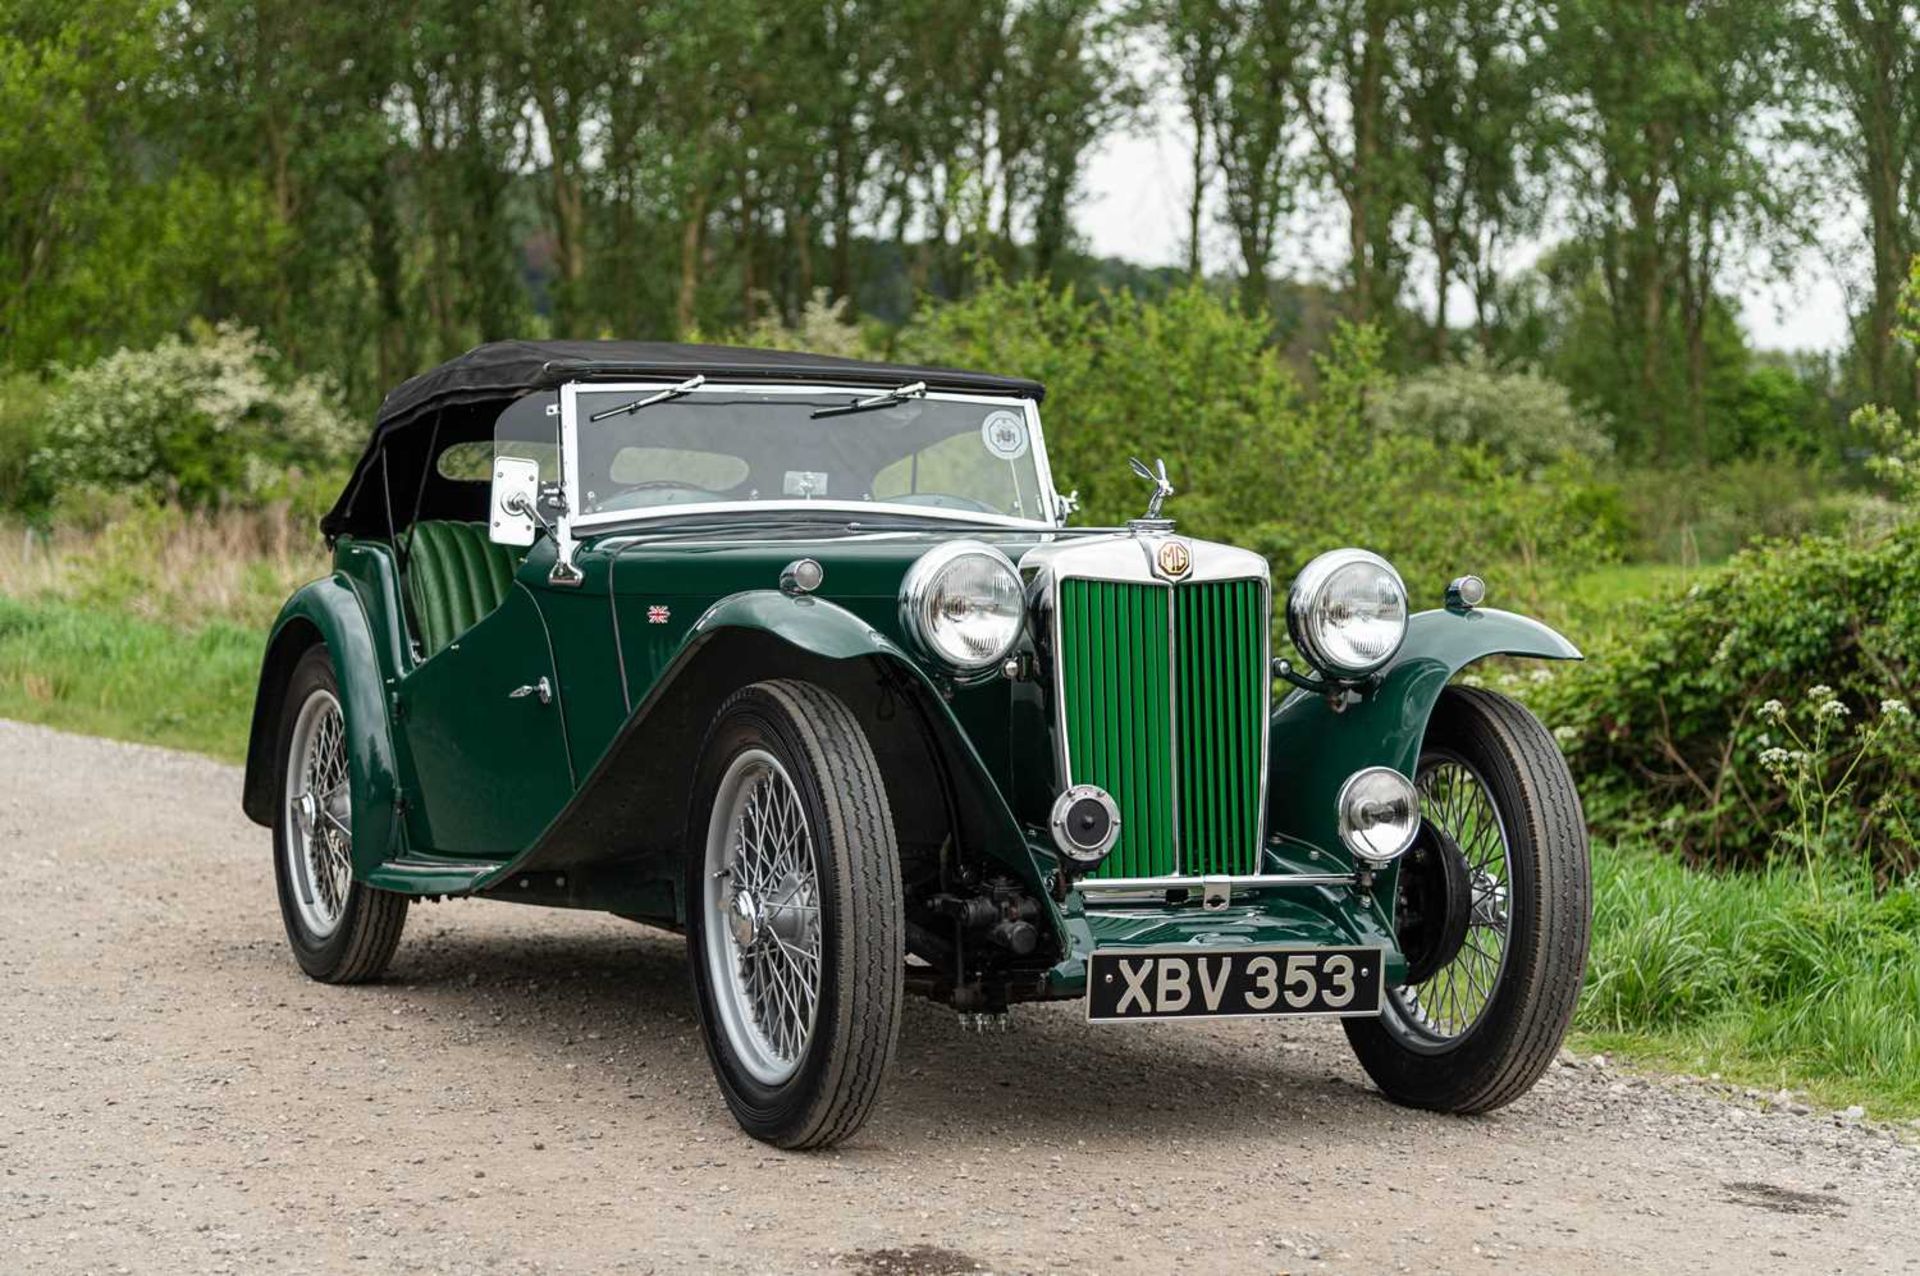 1947 MG TC Midget  Fully restored, right-hand-drive UK home market example - Image 5 of 76